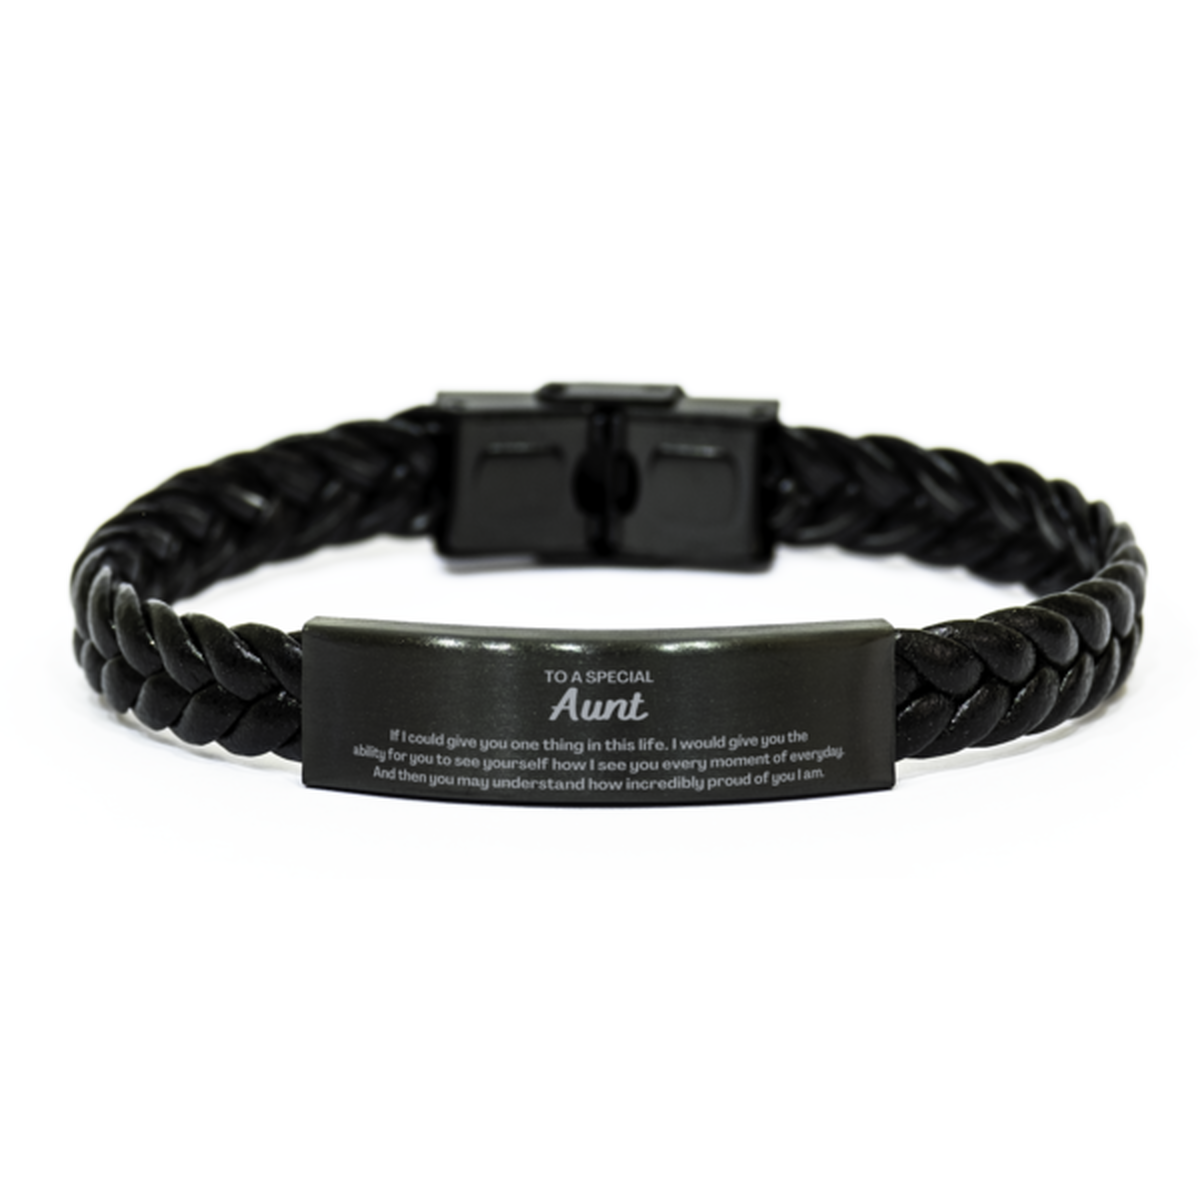 To My Aunt Braided Leather Bracelet, Gifts For Aunt Engraved, Inspirational Gifts for Christmas Birthday, Epic Gifts for Aunt To A Special Aunt how incredibly proud of you I am